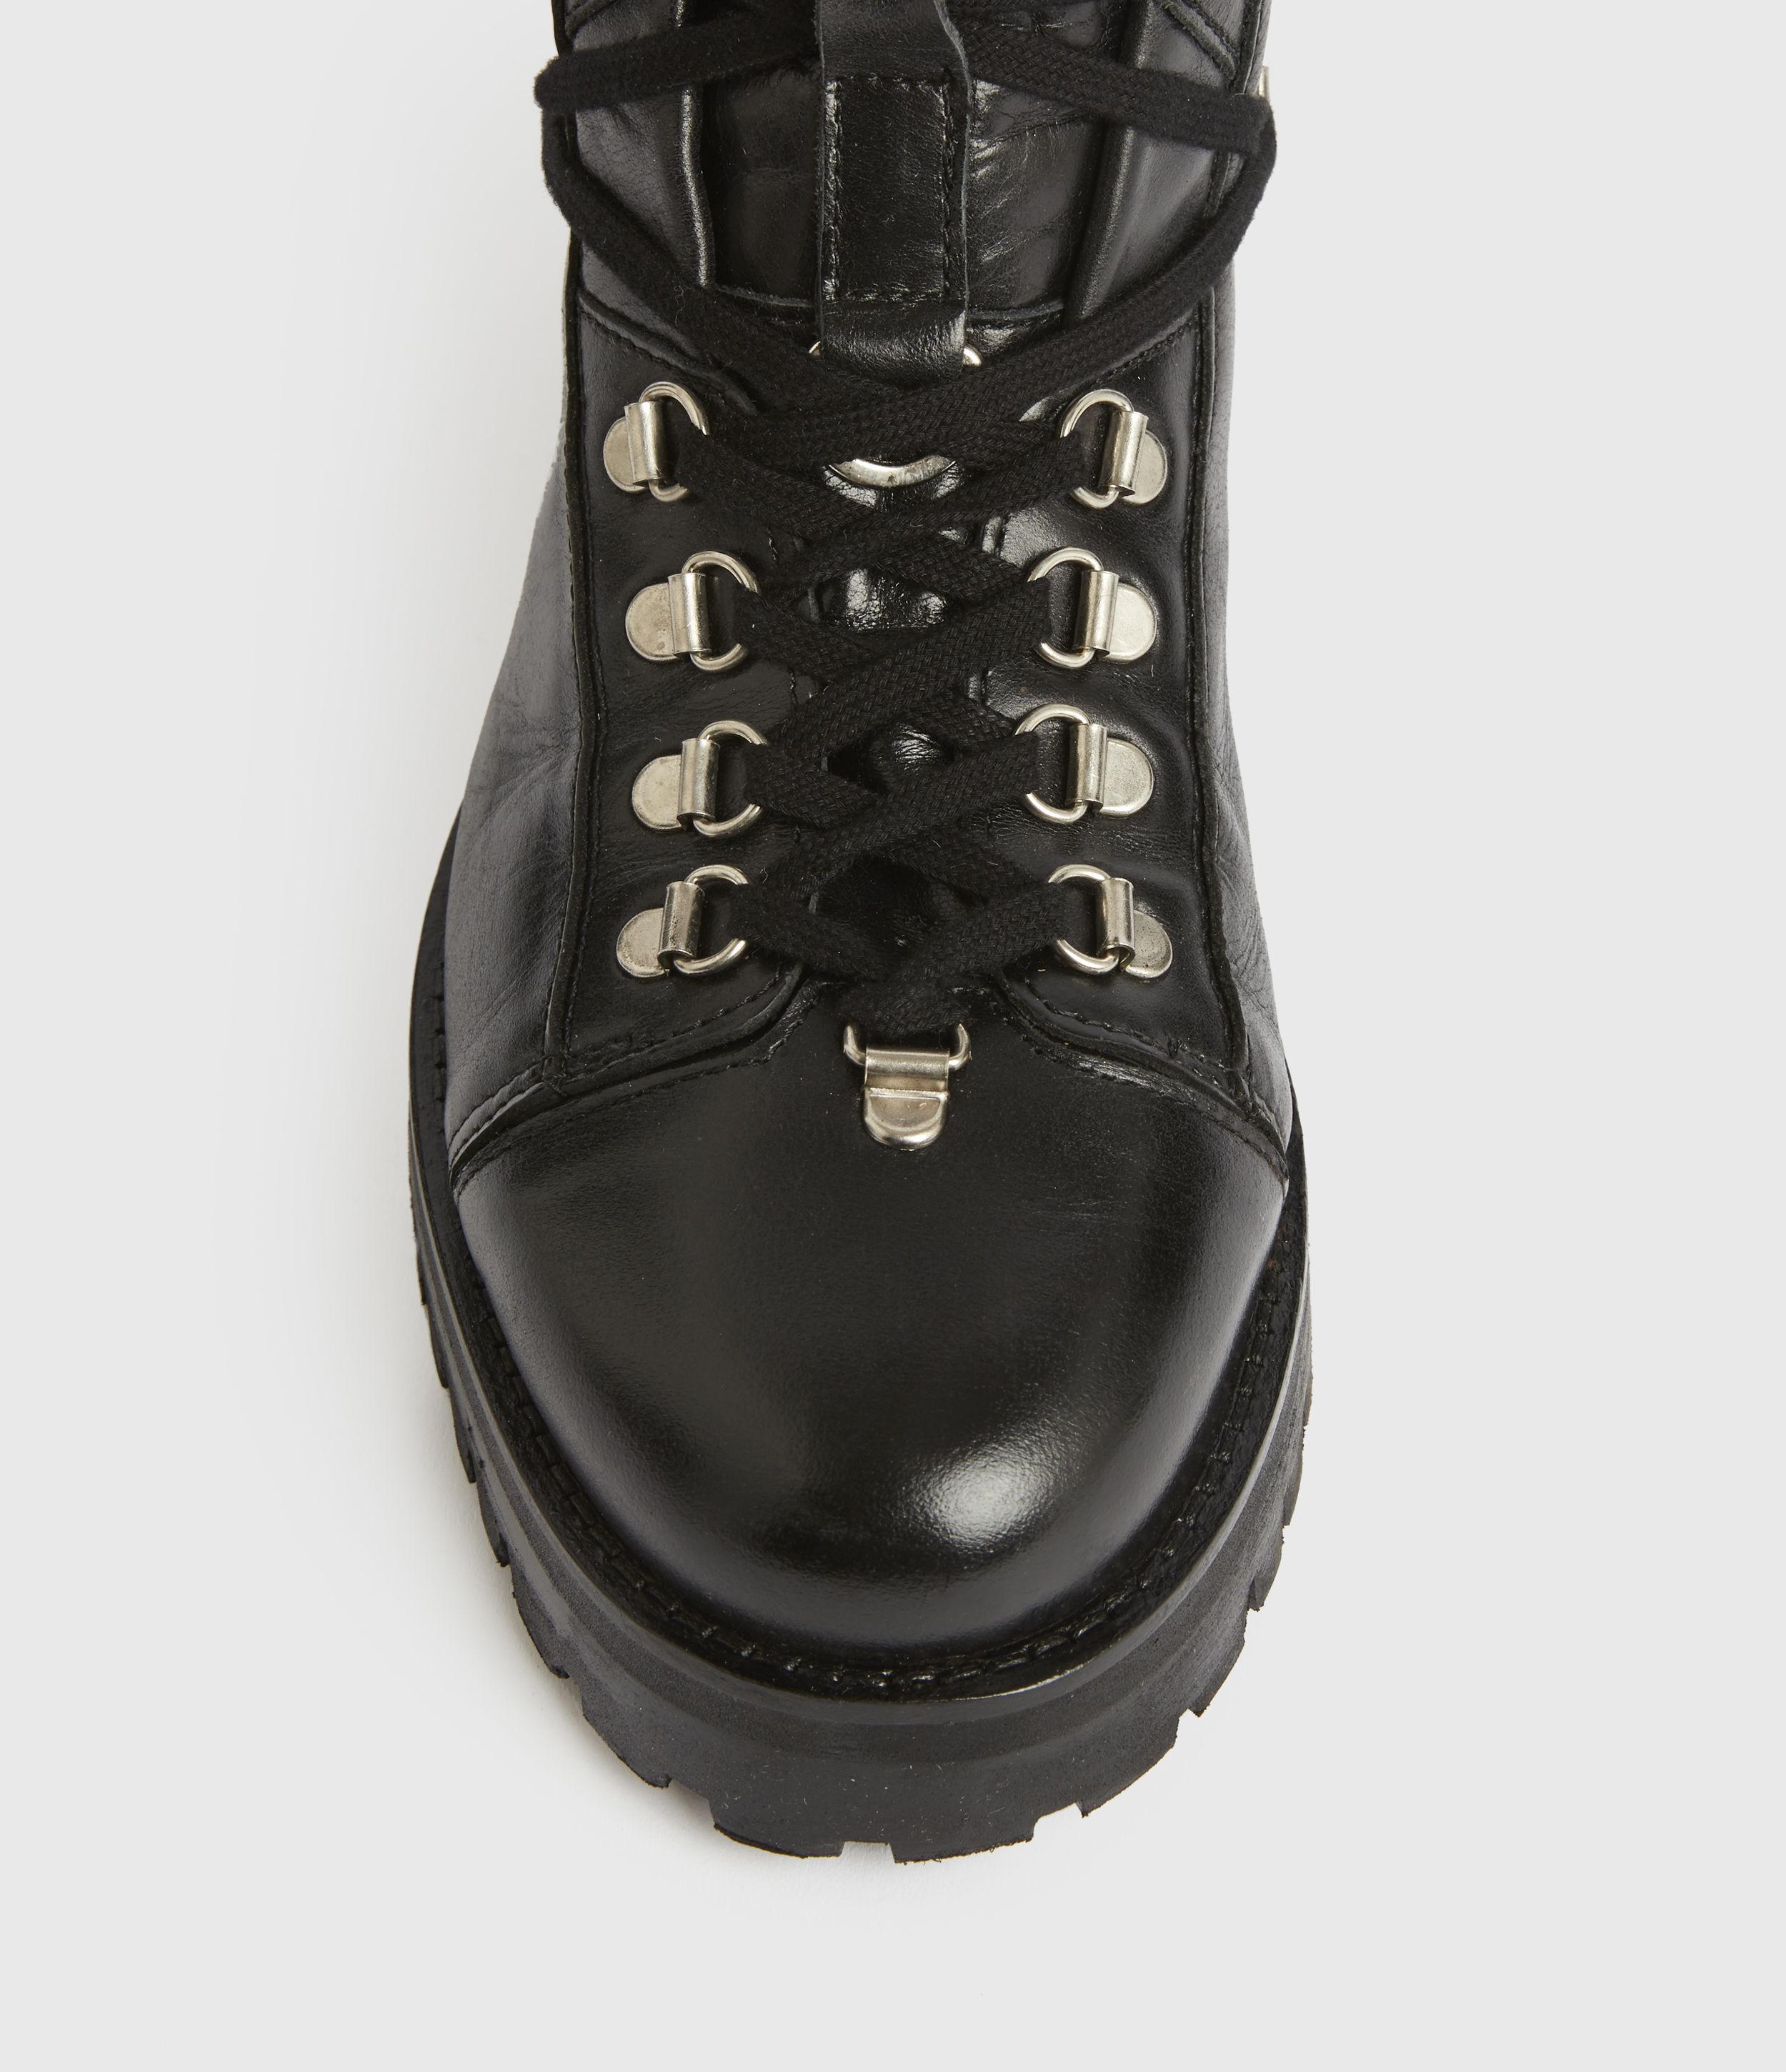 AllSaints Franka Leather Boots in Black - Lyst